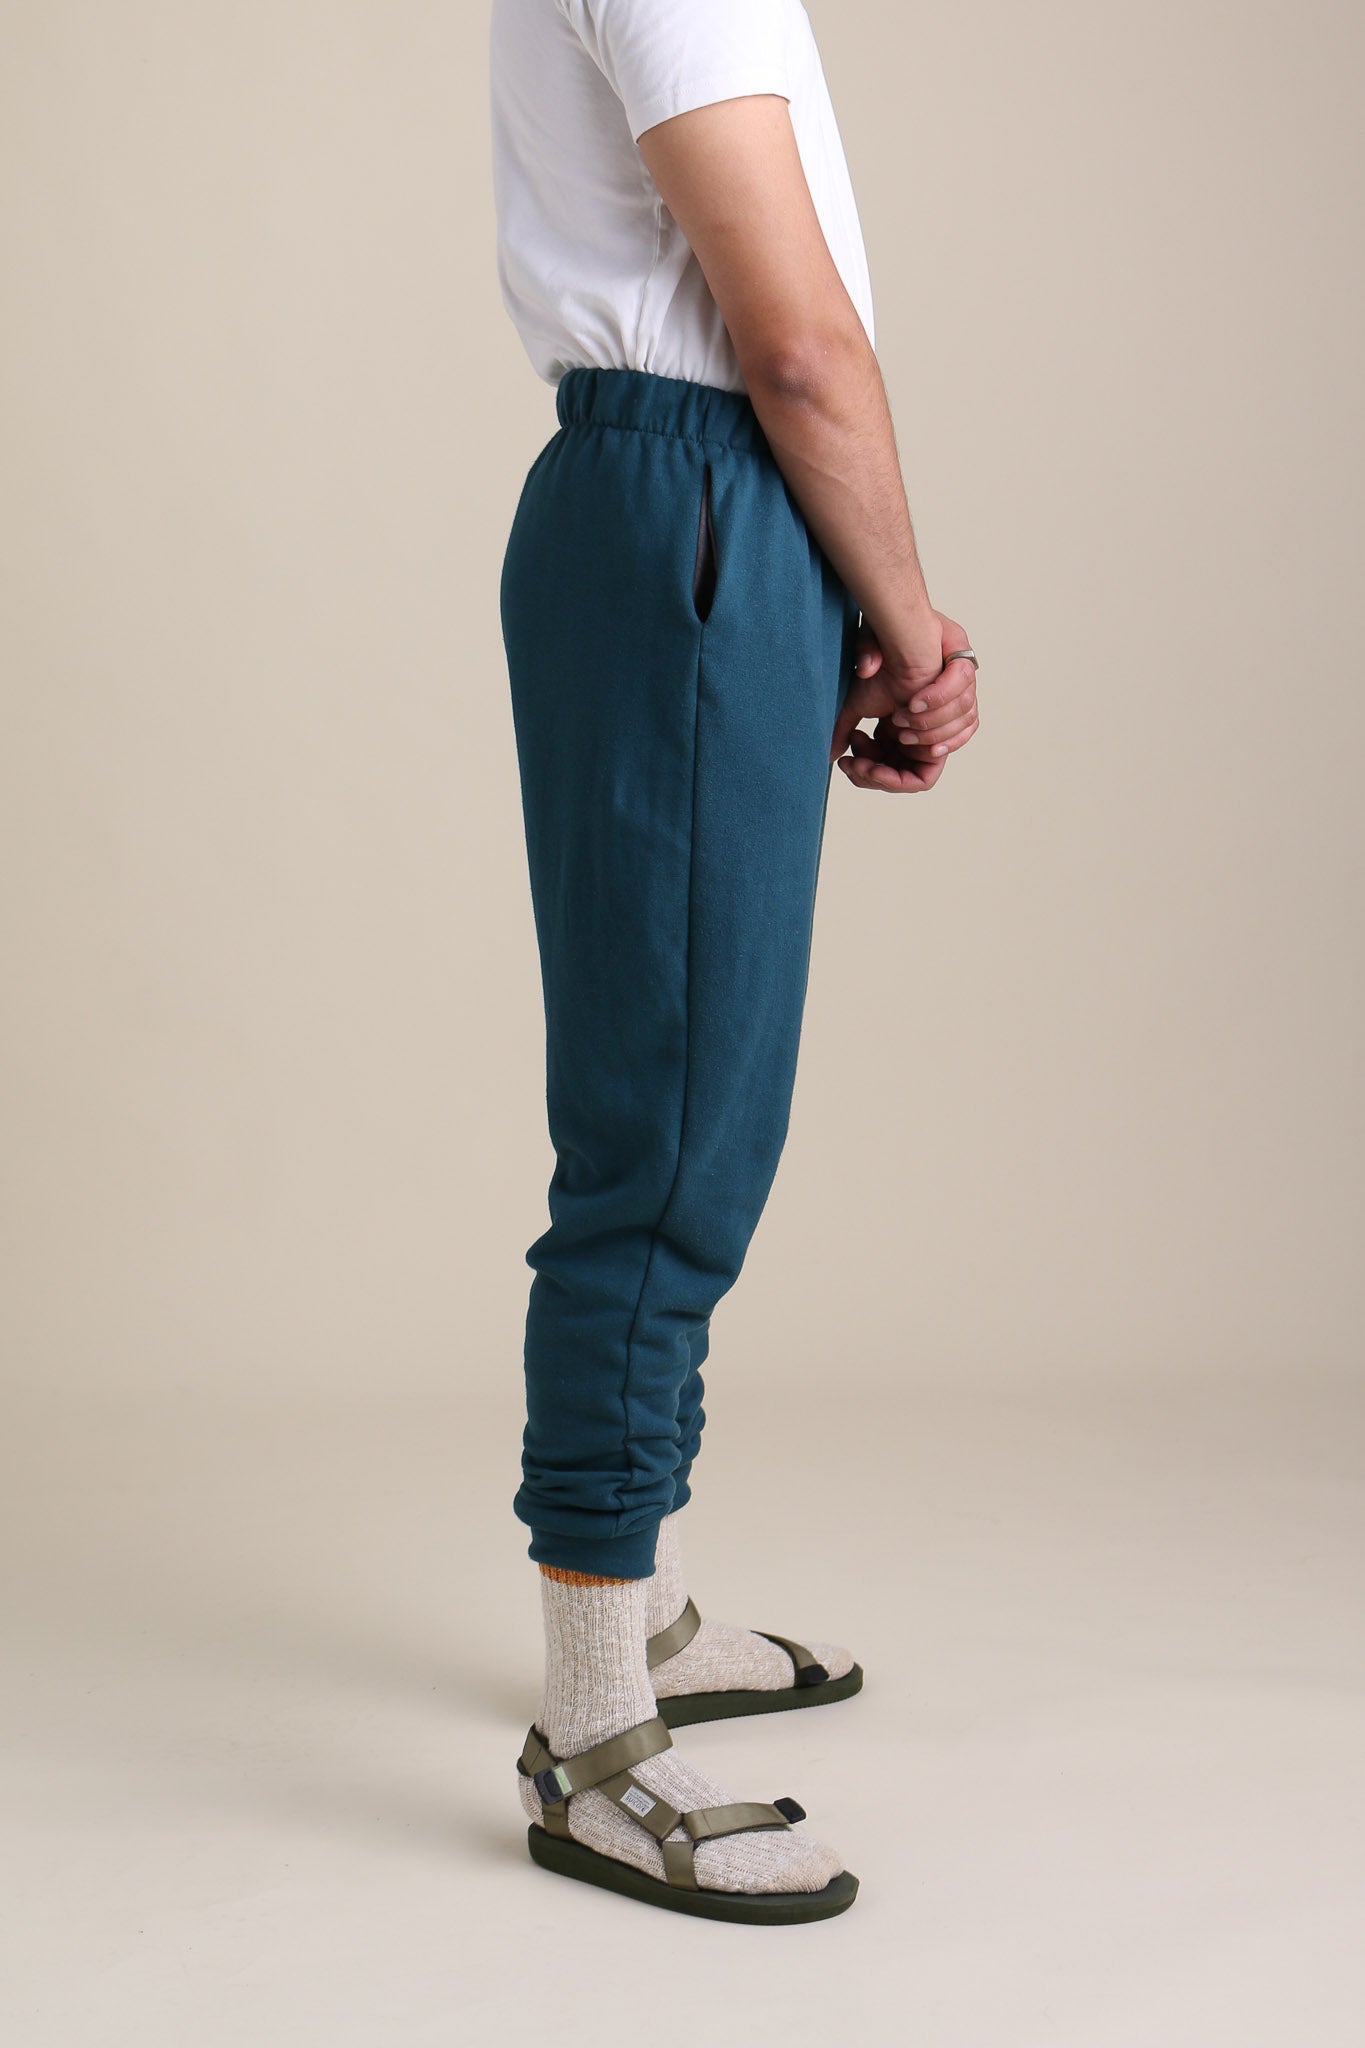 Joggers in Marine – Conscious Clothing